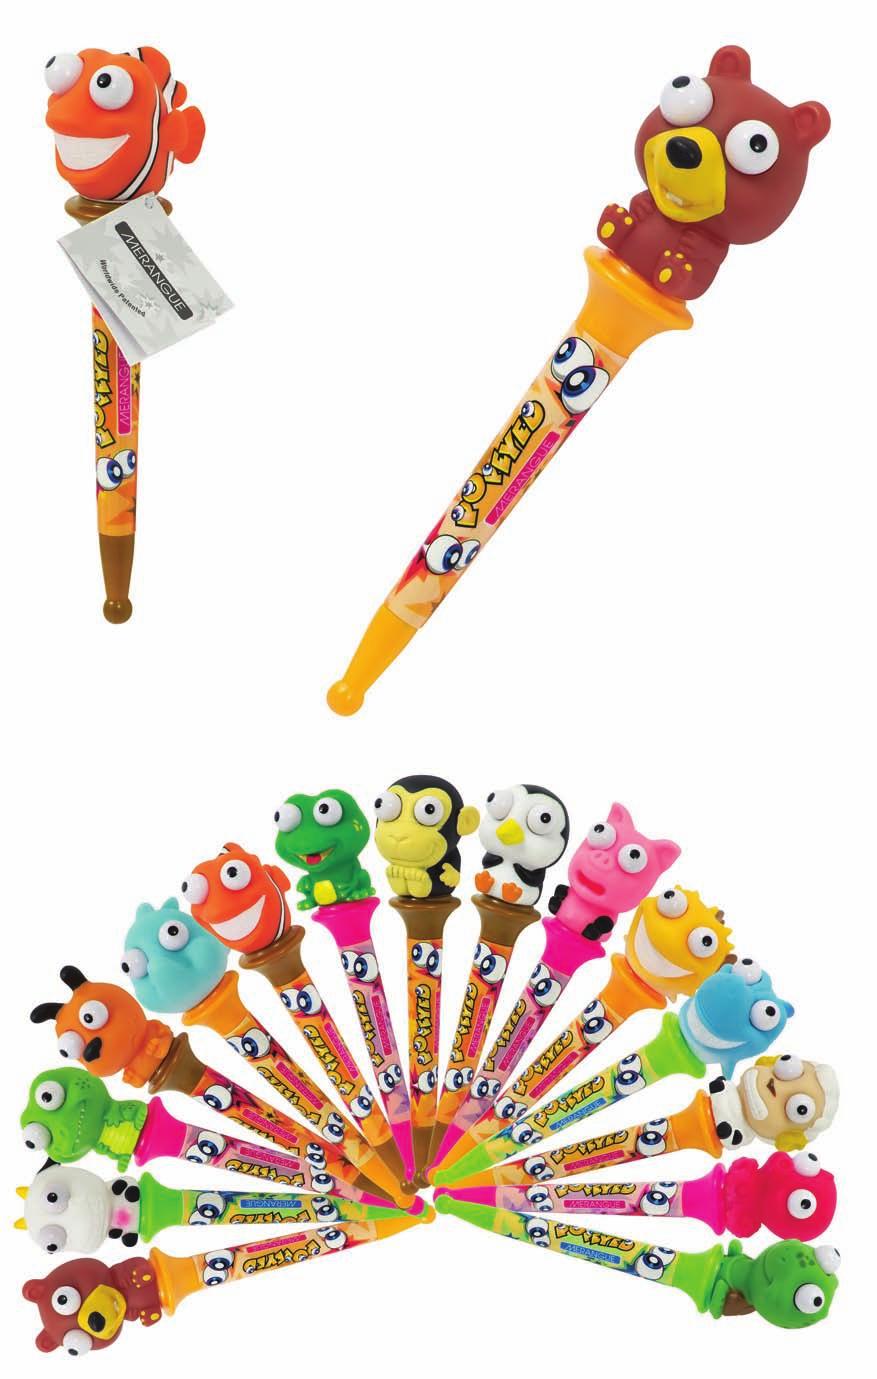 POPEYED PENS 38Q1-8000-00-000 NOVELTY Popeyed Pens - Gel-based ink dries instantly - Non-toxic - Contoured rubber fingergrips